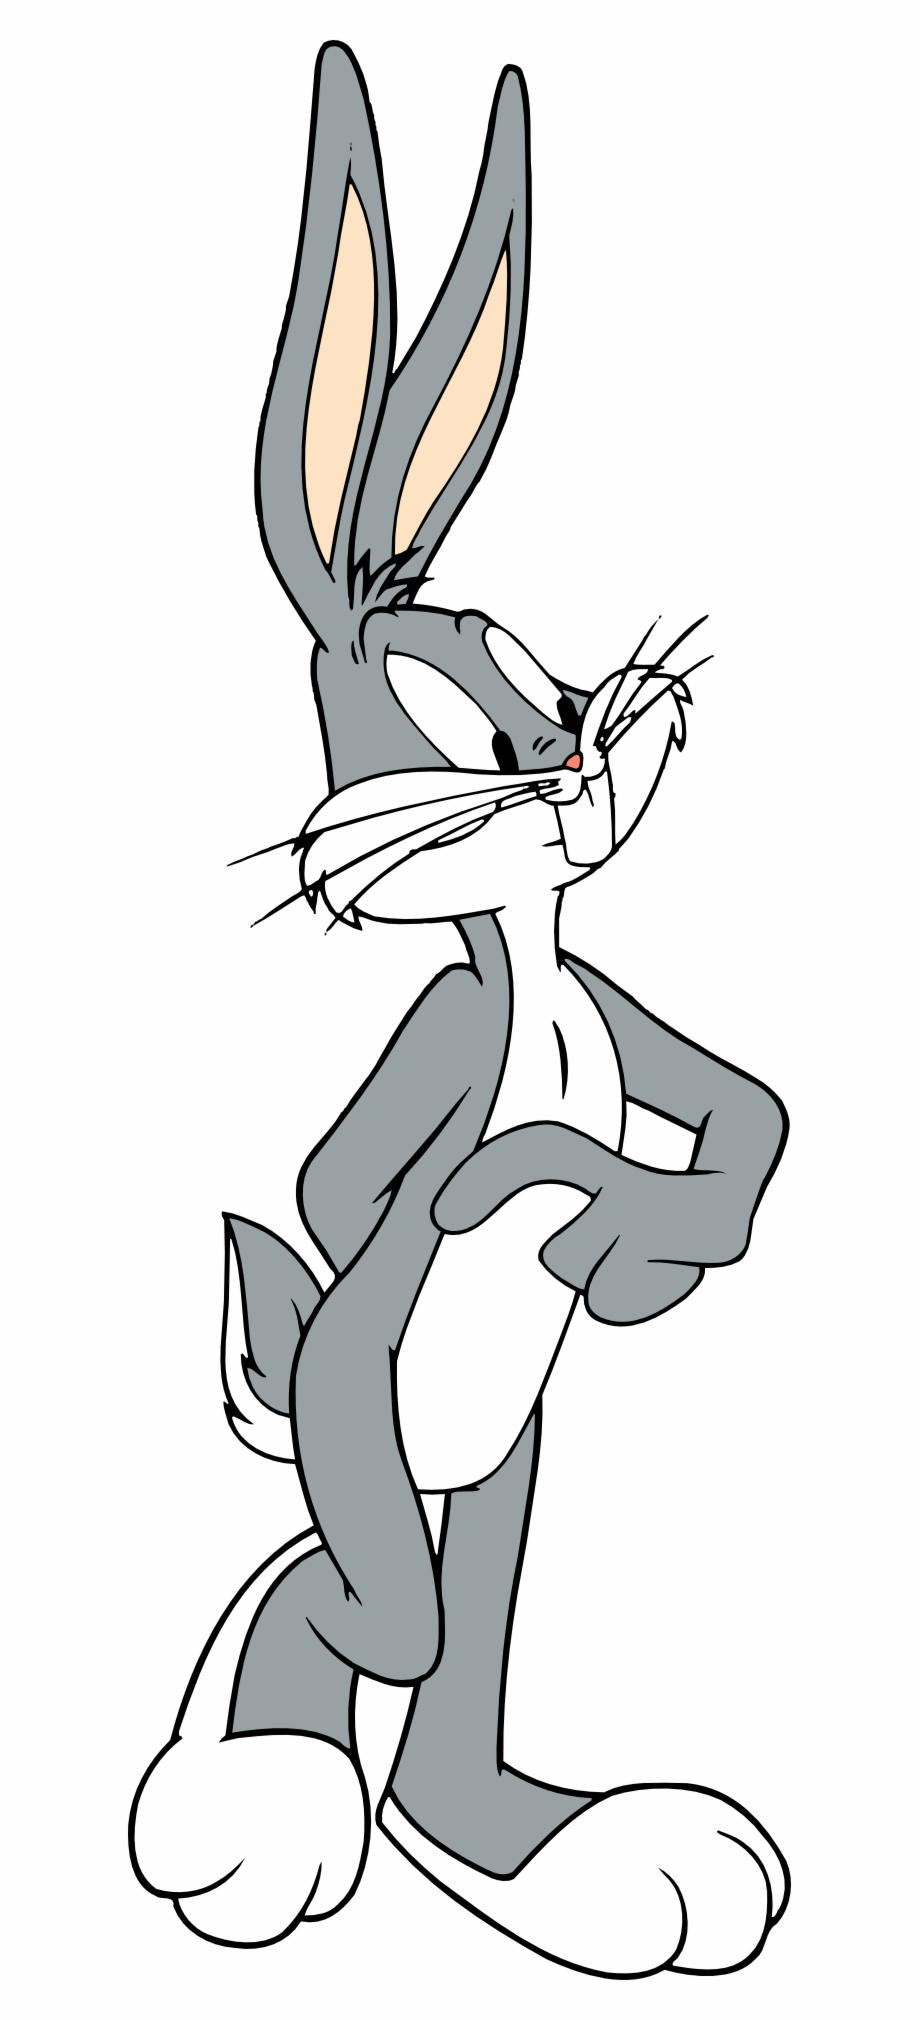 Bugs Bunny Begins To Flirt While Not Wearing